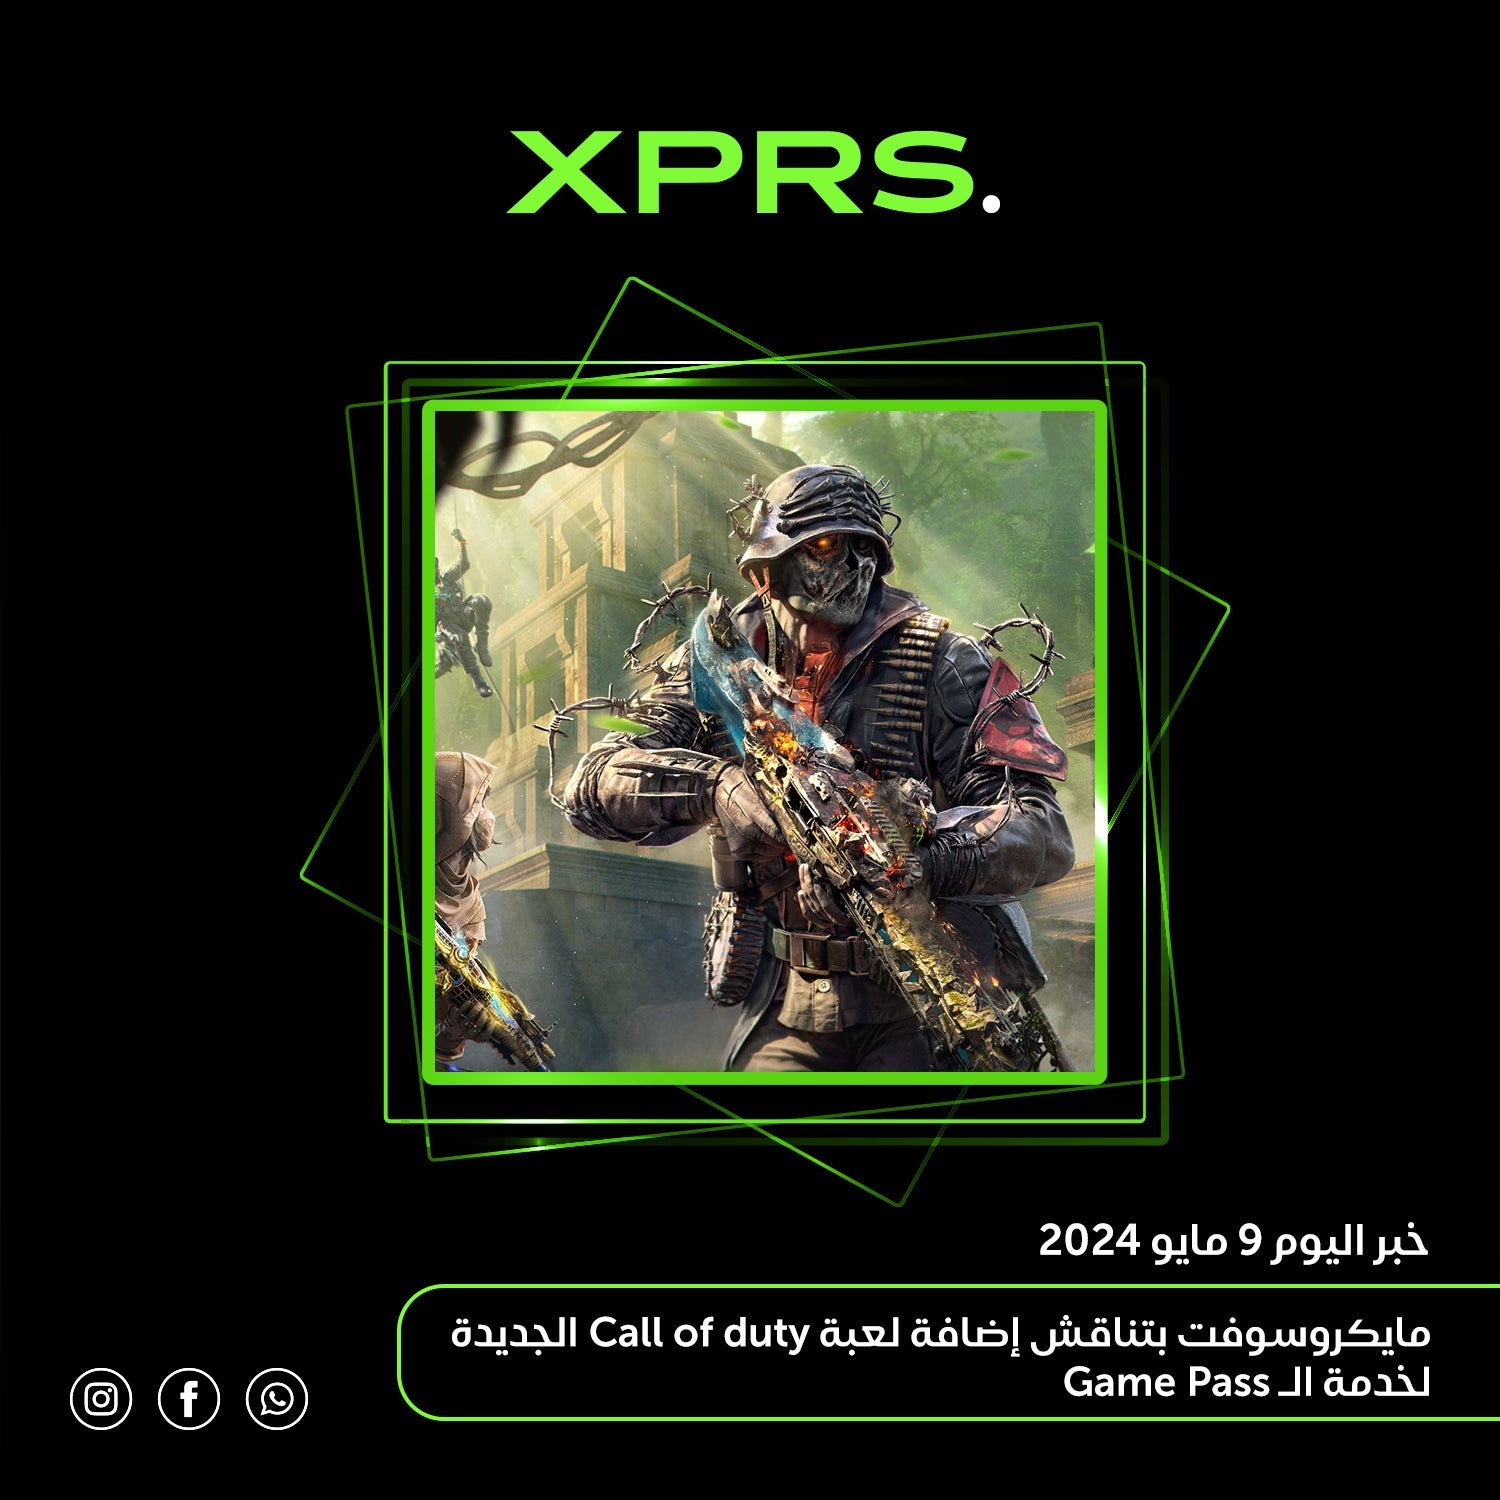 ! XPRS خبر اليوم من - XPRS